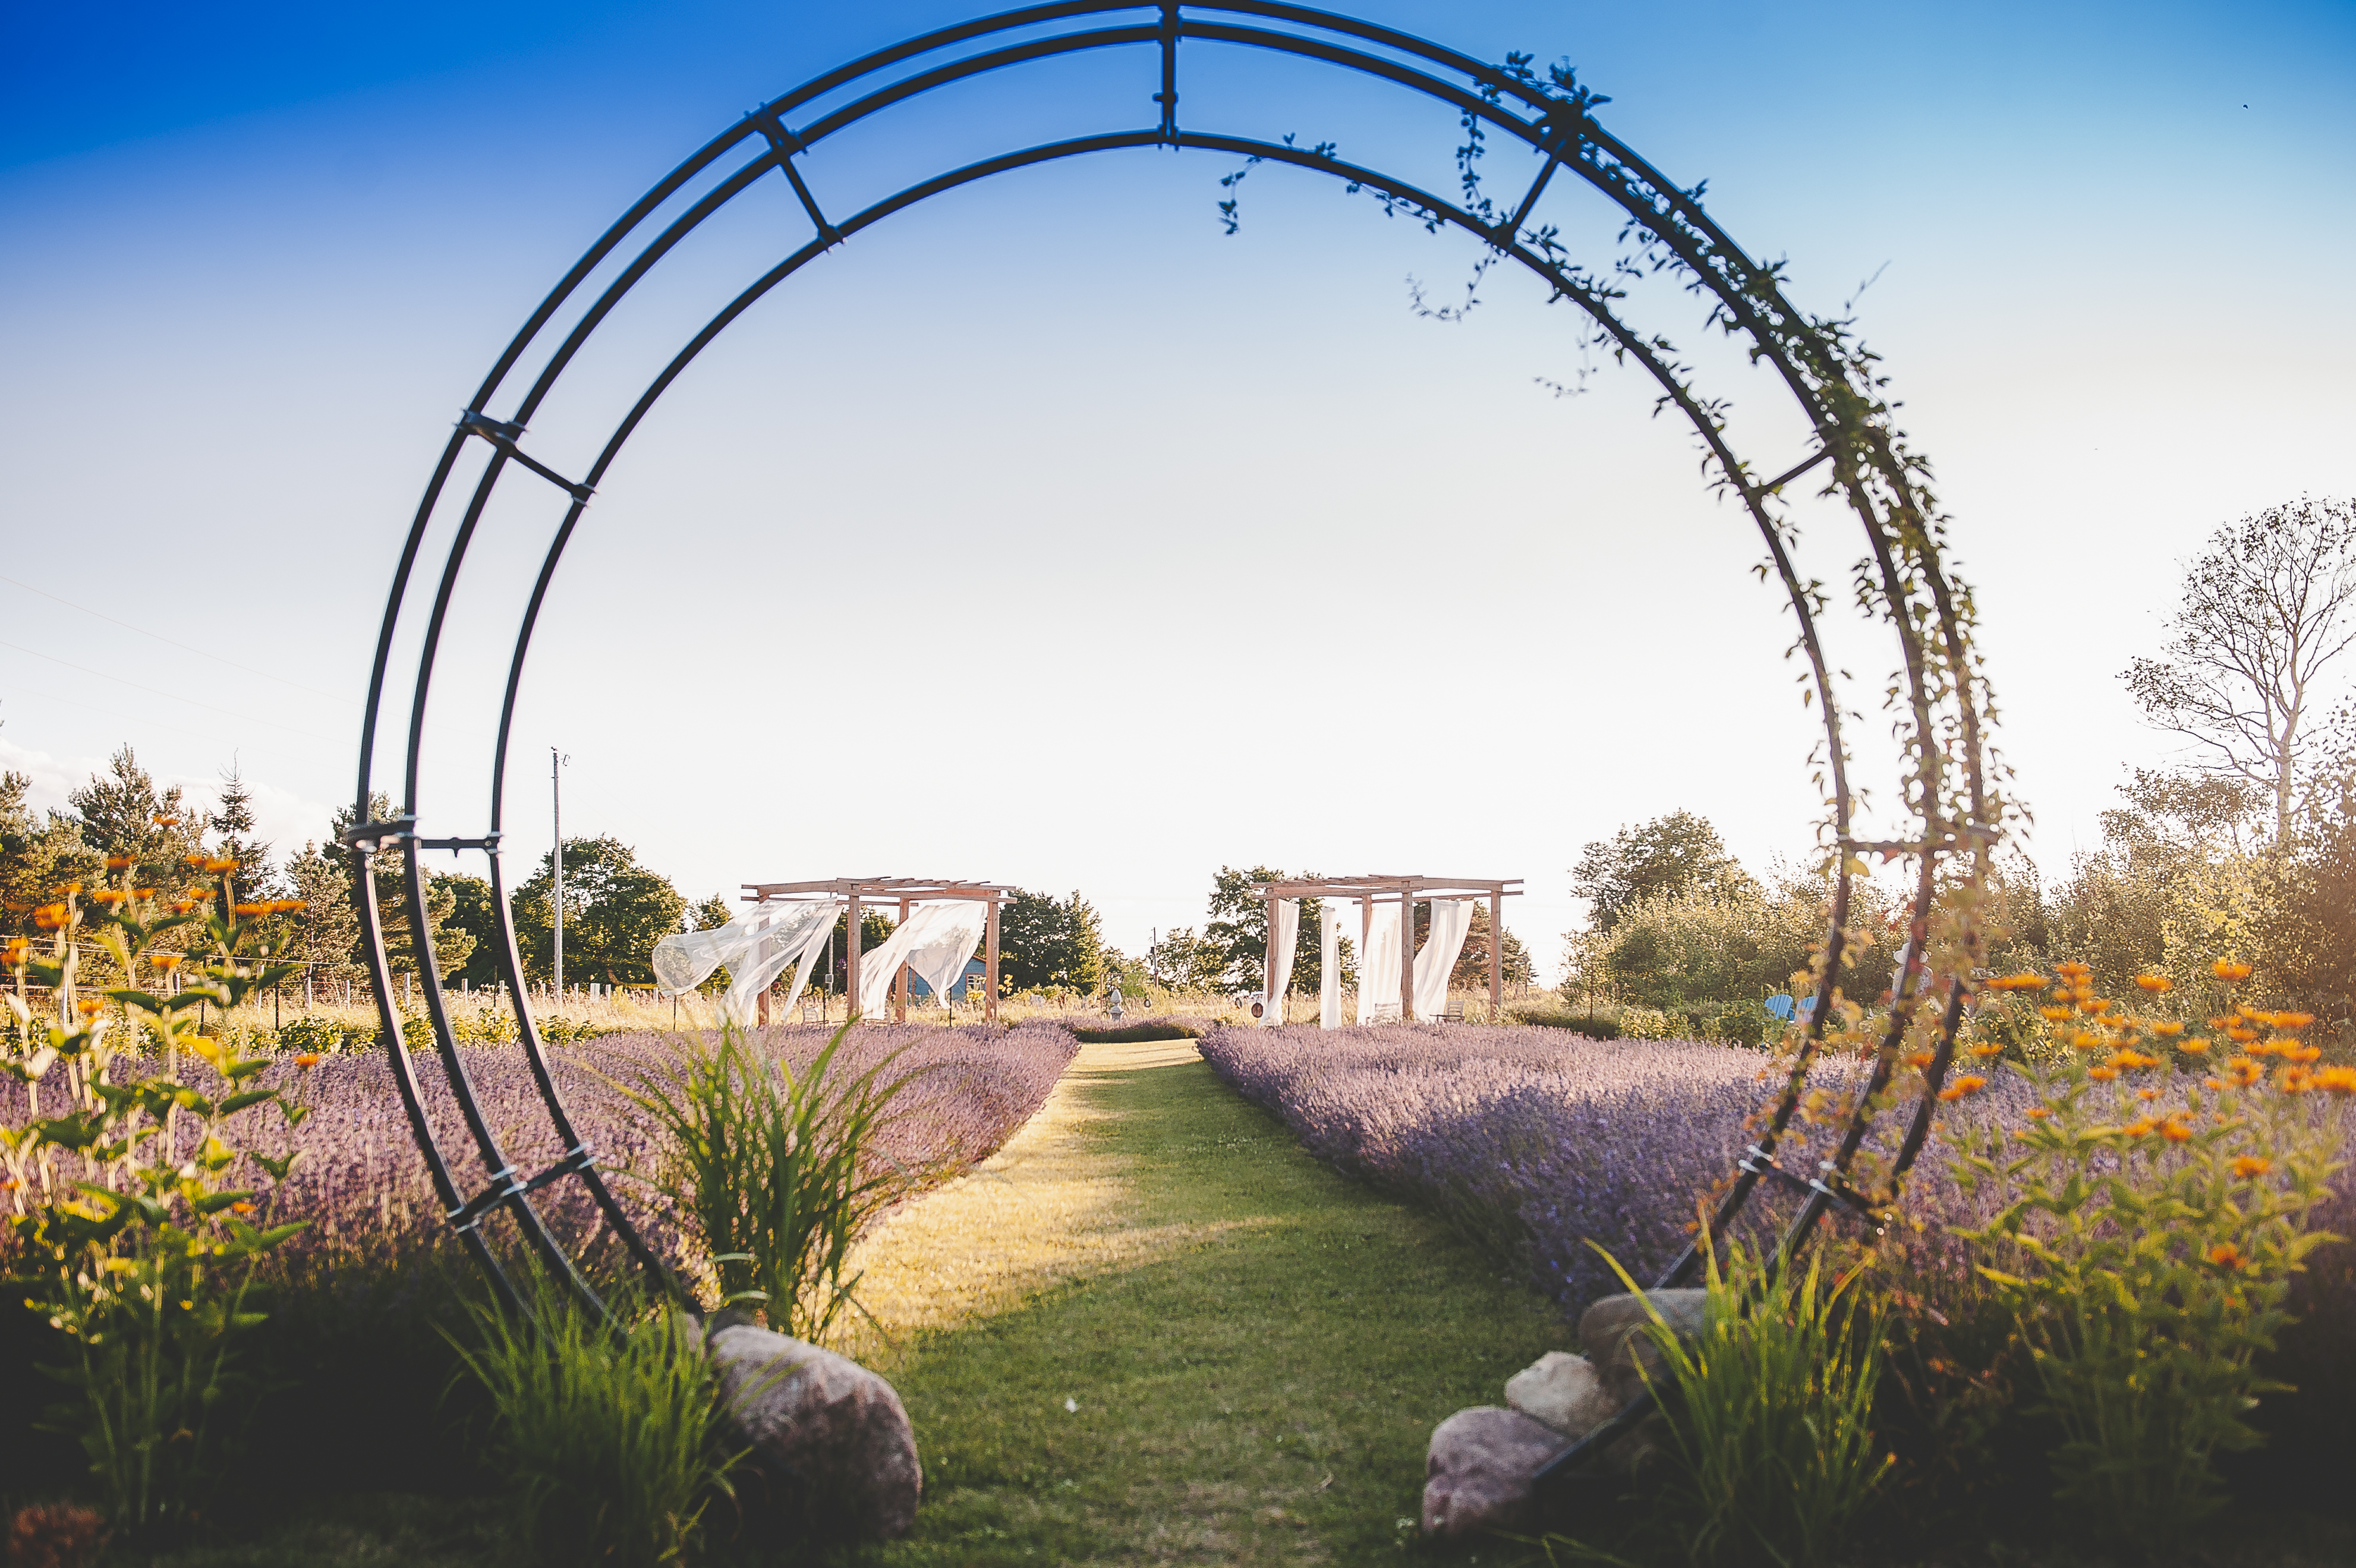 Large circular archway leading into a lavender field